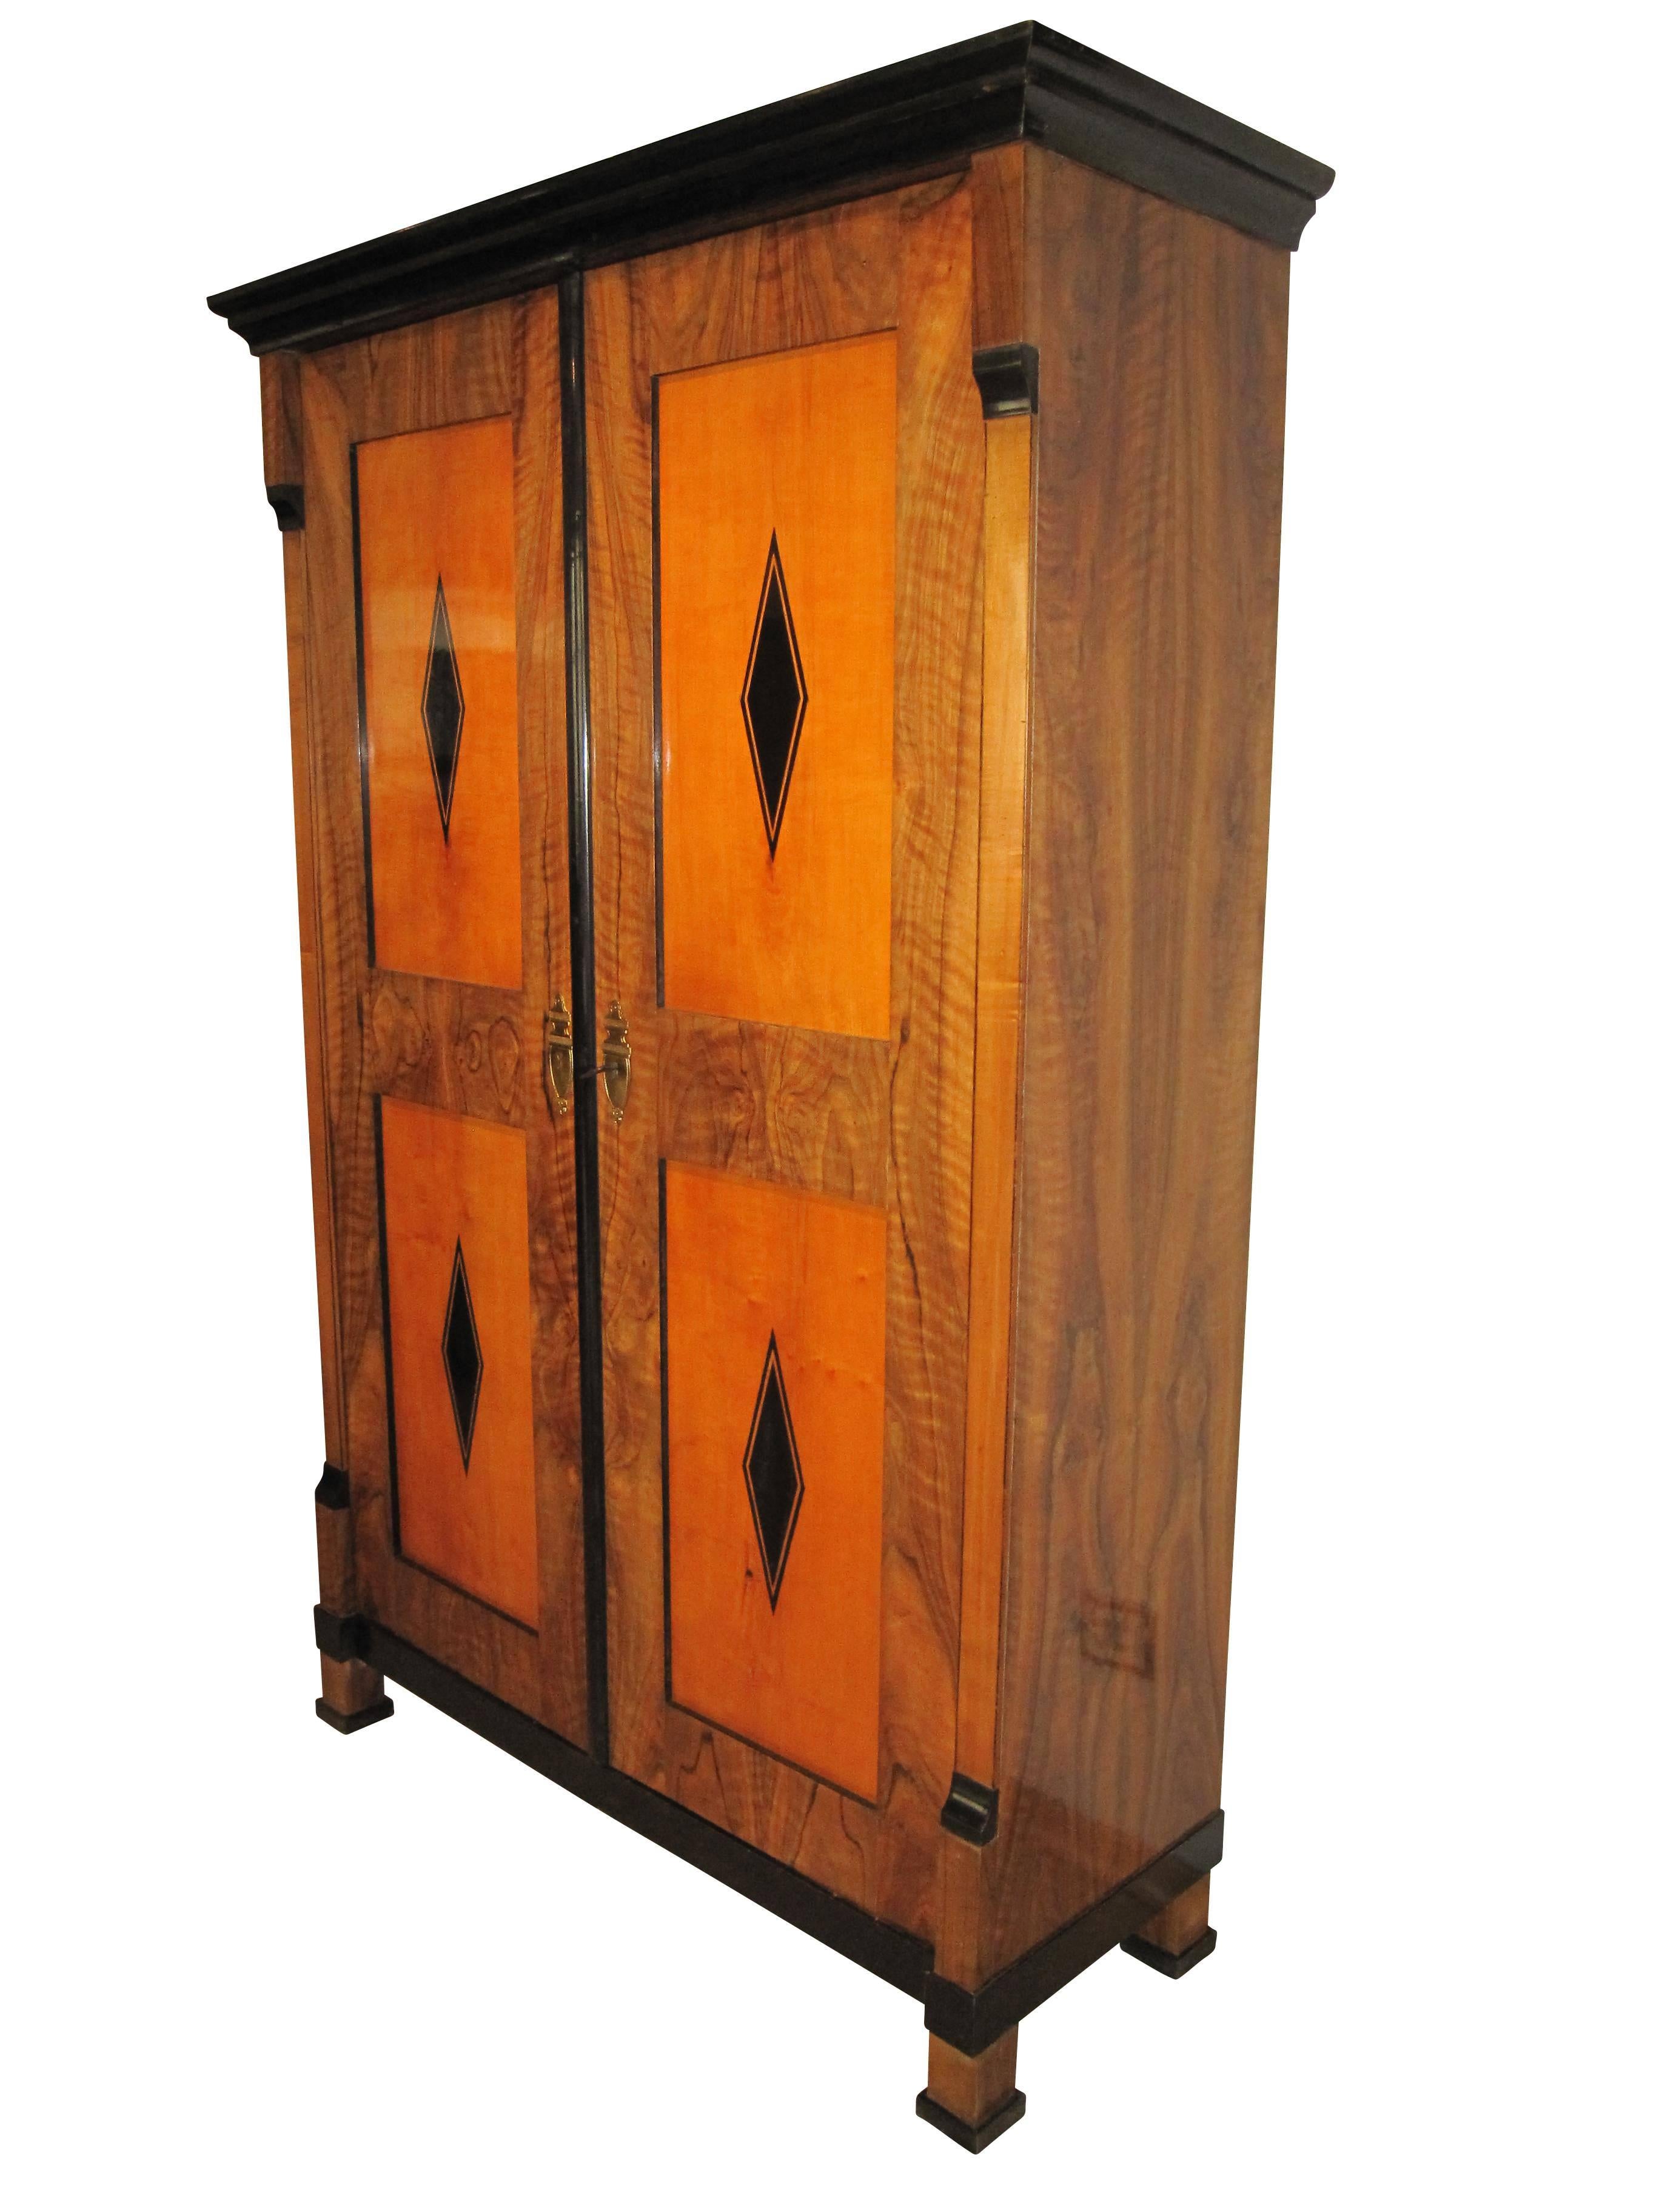 This two-doored early Biedermeier armoire is from Vienna, Austria, built around 1820. It has four maple fillings inside the walnut veneered framed boxes. On each of the fillings there is a typical classicist hash carefully with painted with Ink. the